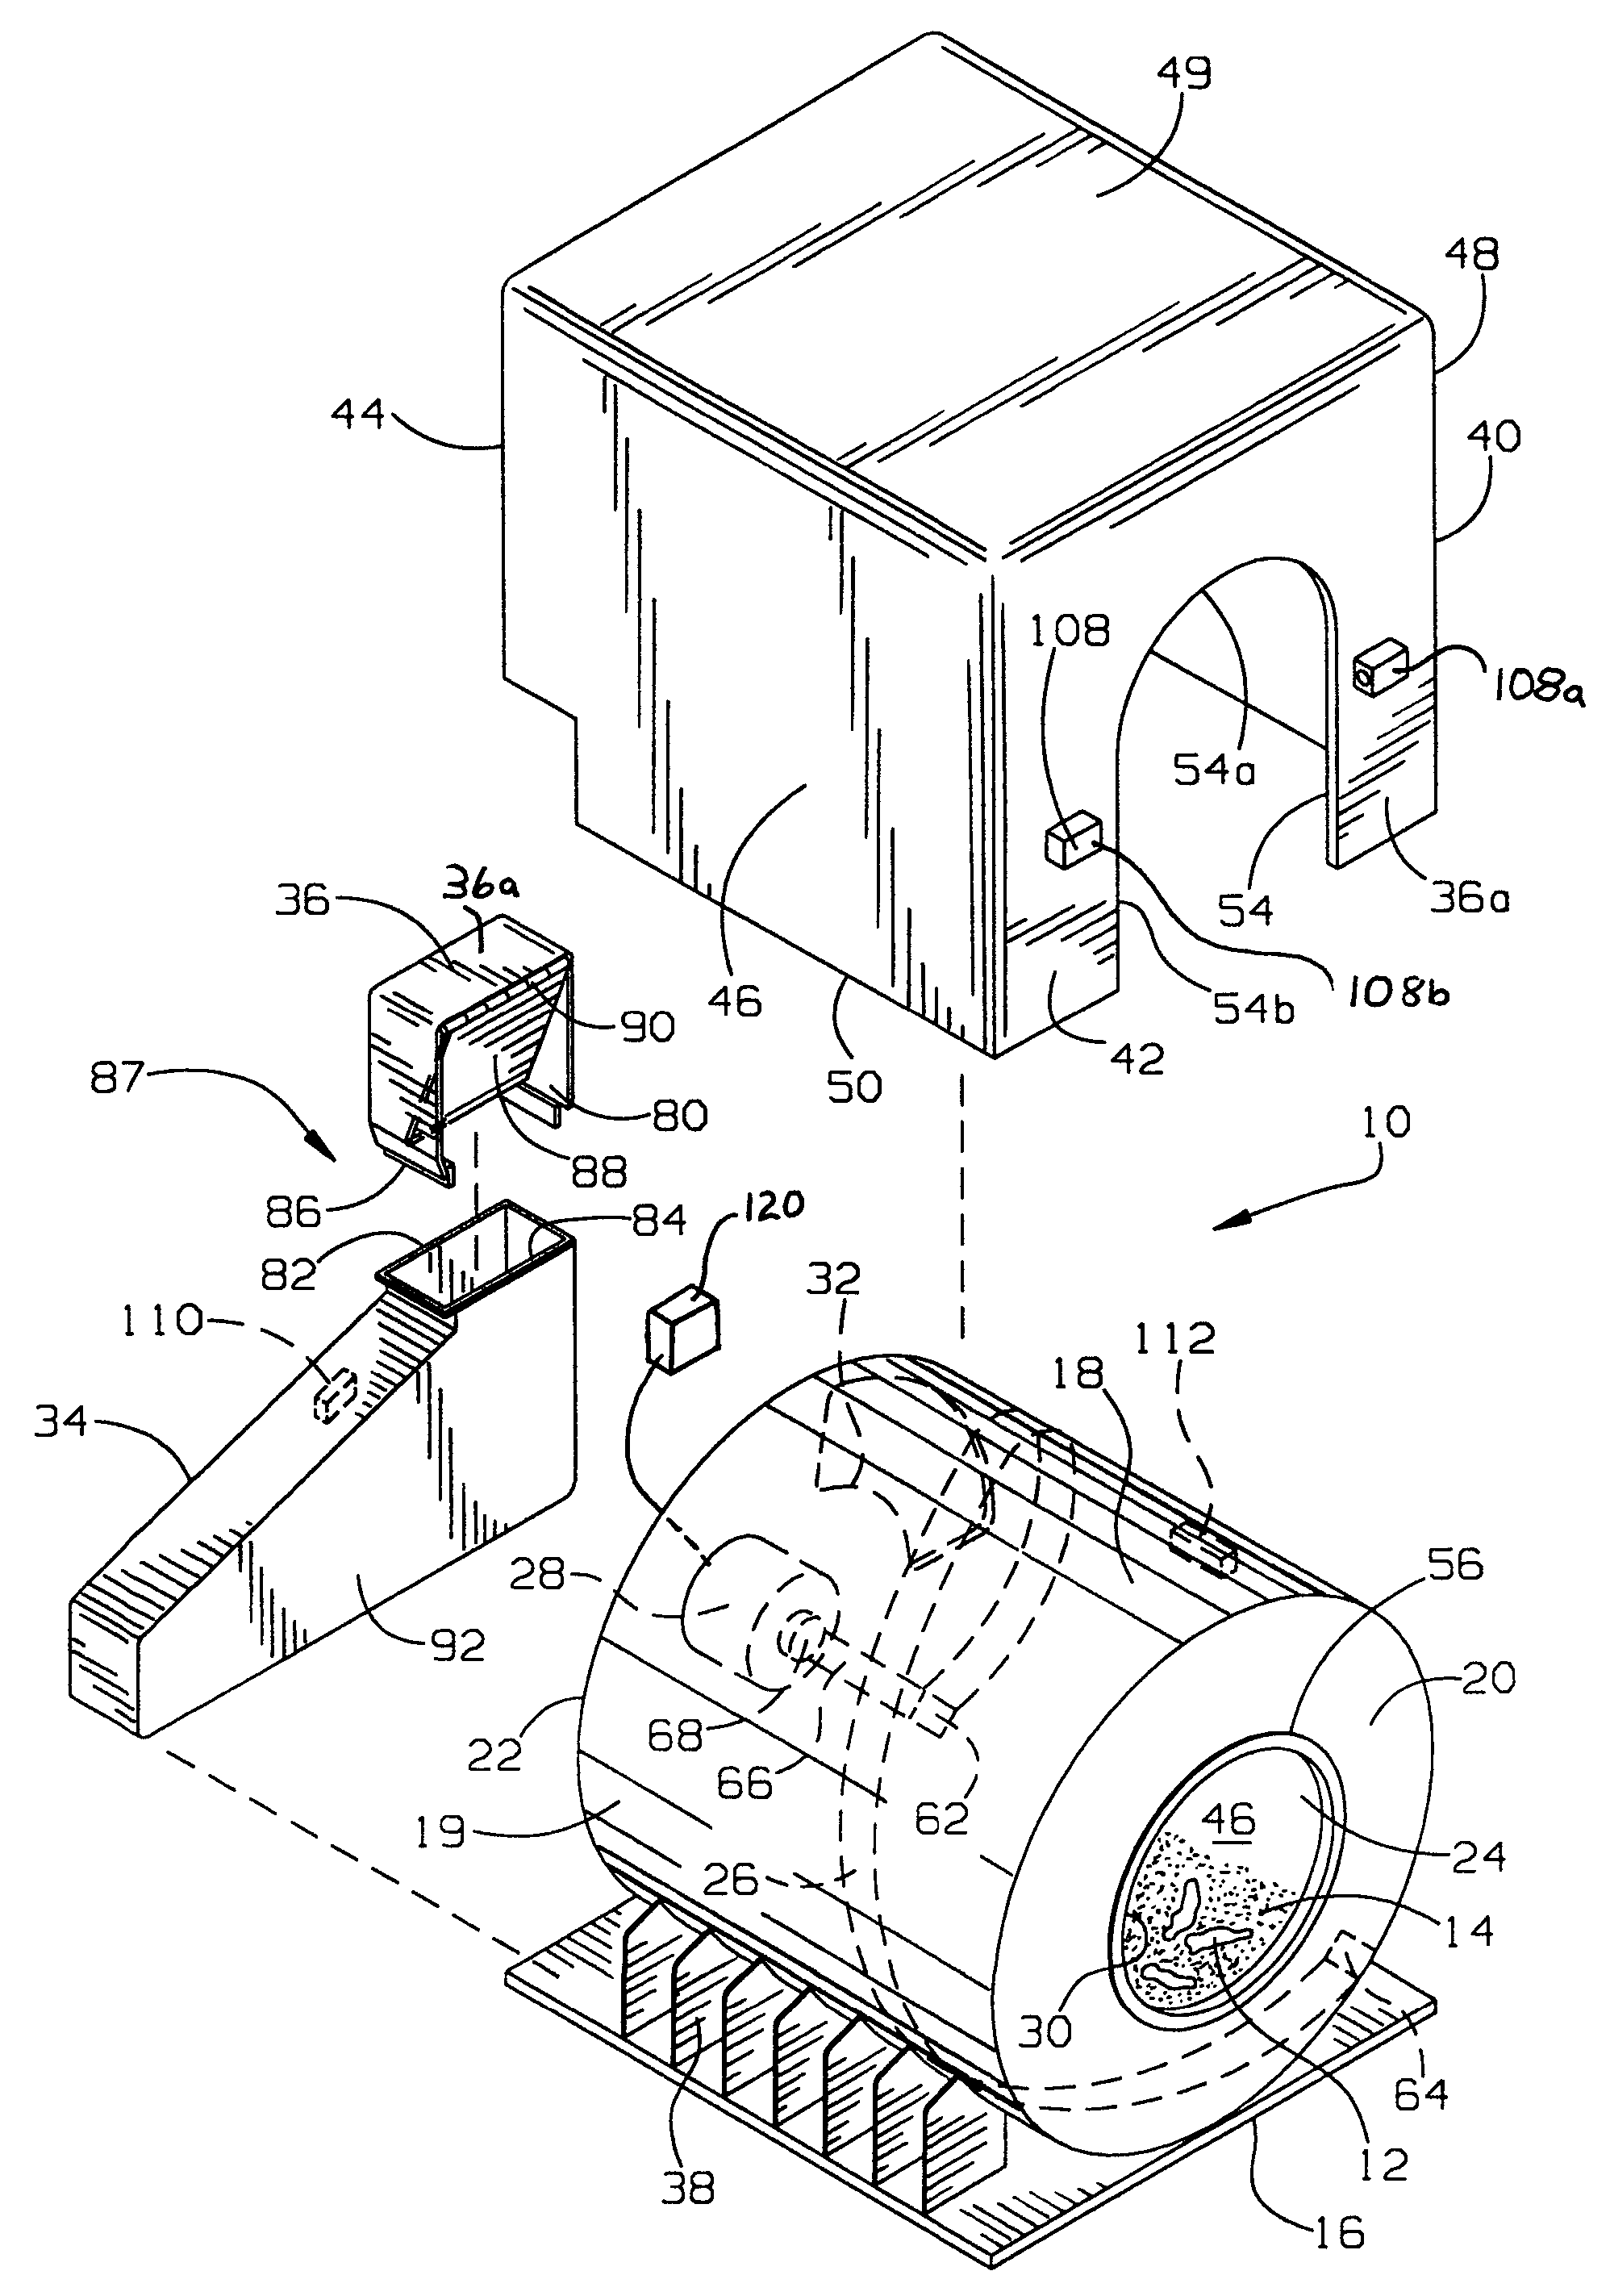 Apparatus and method to remove animal waste from litter